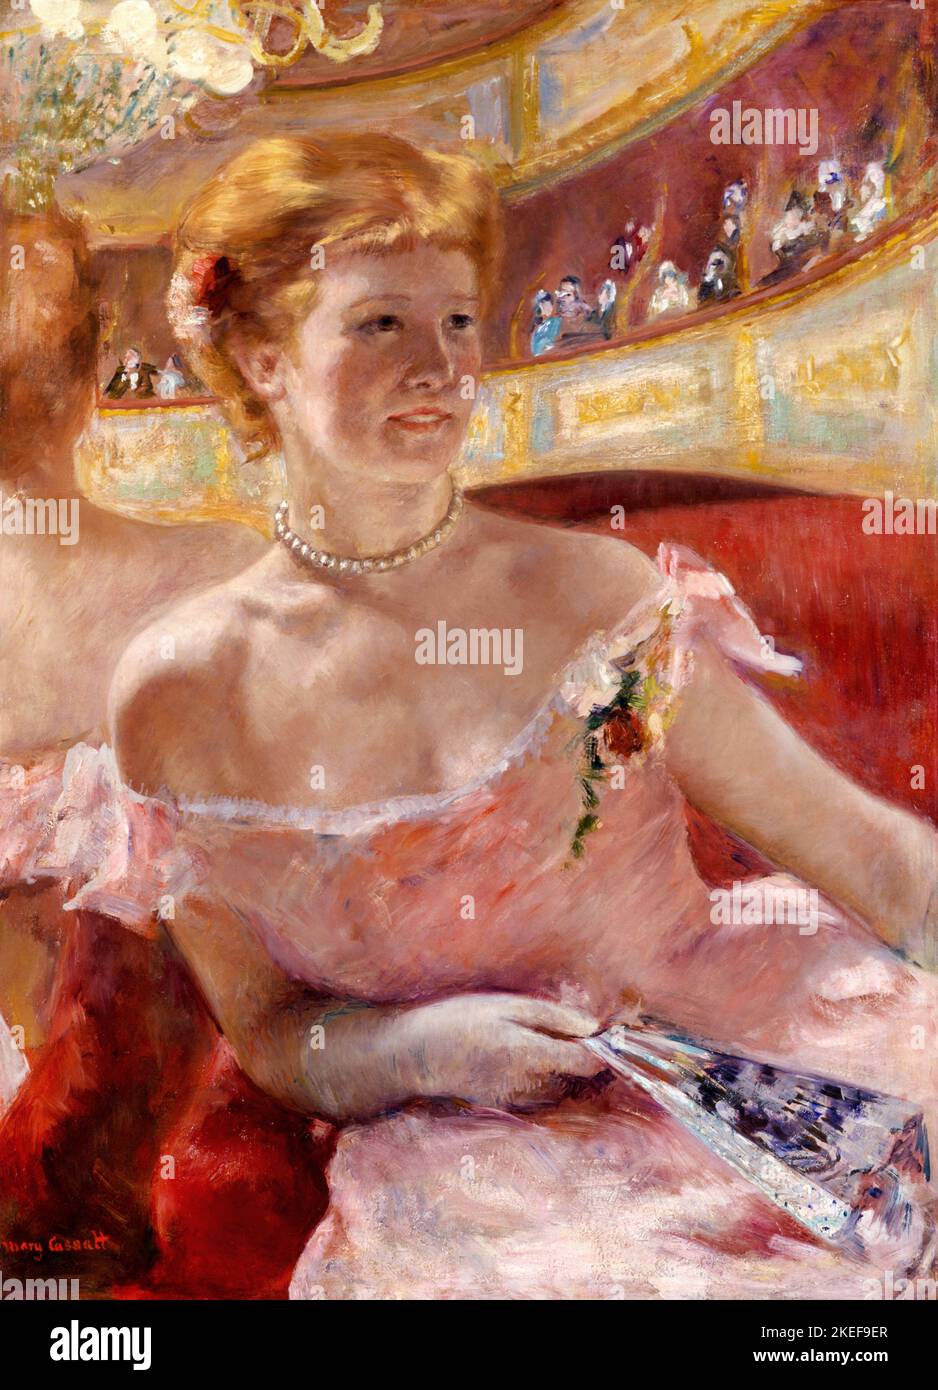 Mary Cassatt, Woman with a Pearl Necklace in a Loge 1879 Oil on canvas, Philadelphia Museum of Art, USA Stock Photo